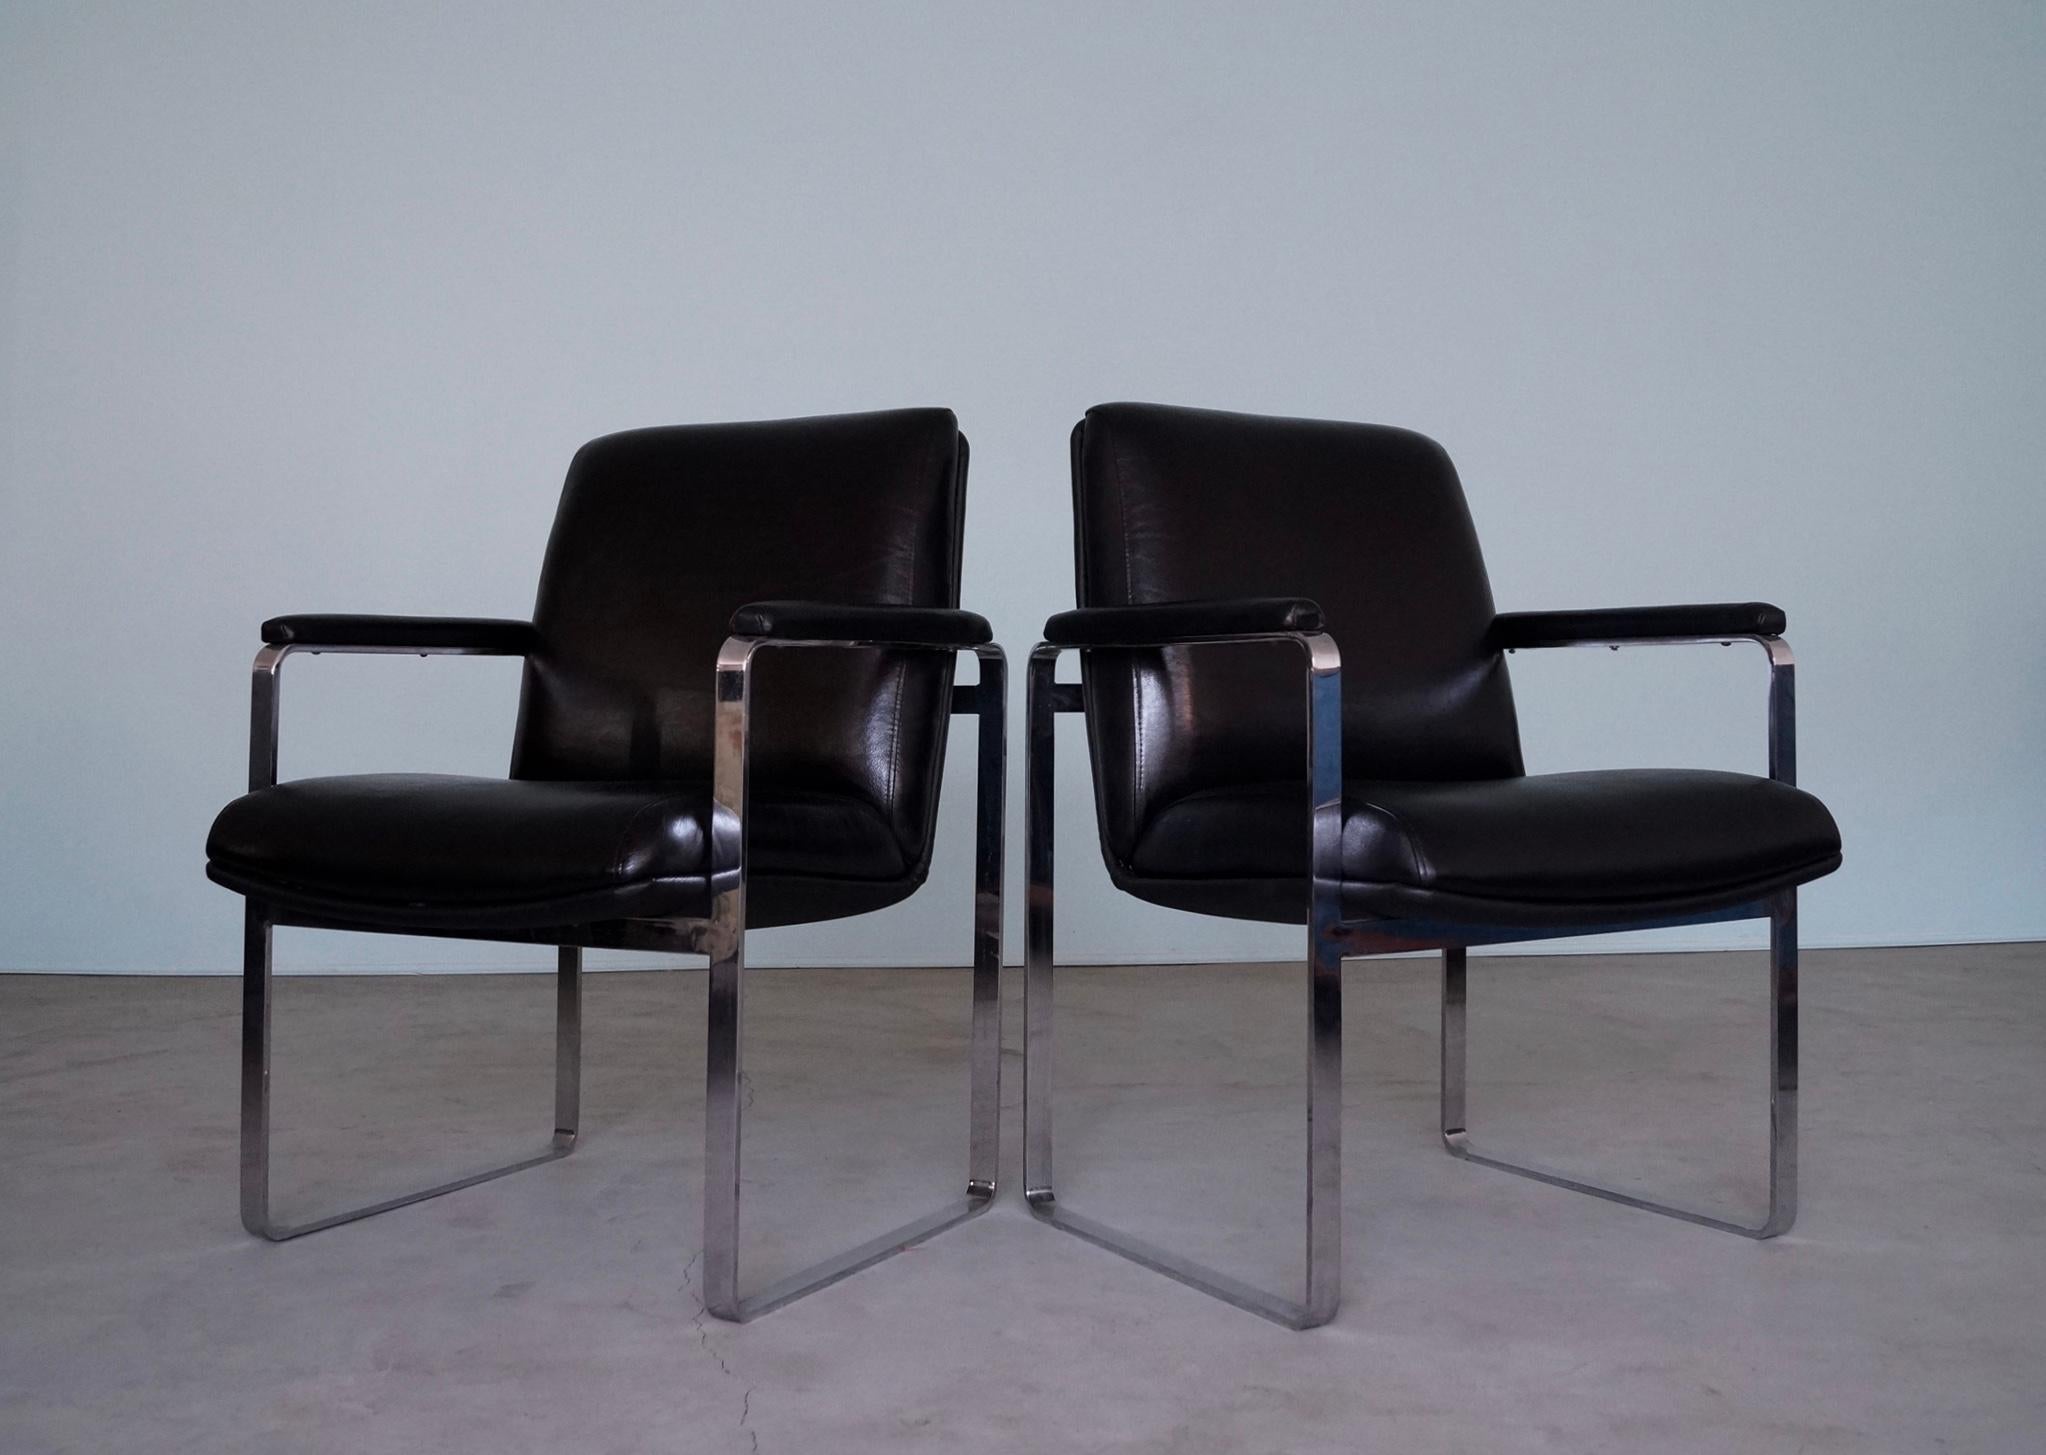 We have this incredible pair of Mid-century Modern lounge chairs for sale. They are original from the 1960's, and are rare designs. They were previously professionally reupholstered in vintage black leather, and are exceptional! Their designs are